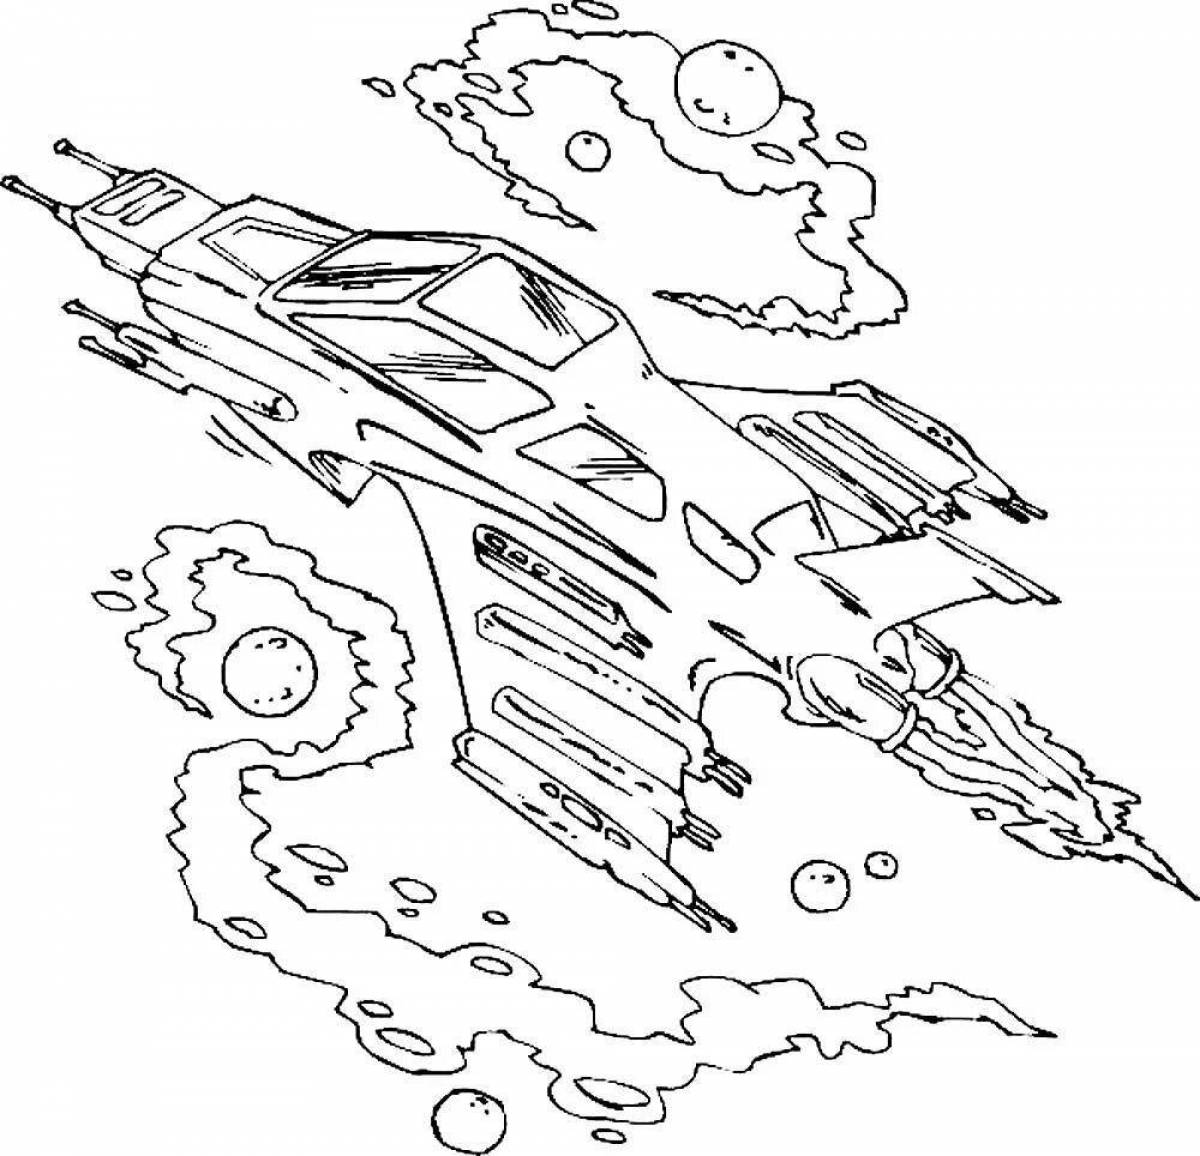 Creative spaceship coloring page for kids